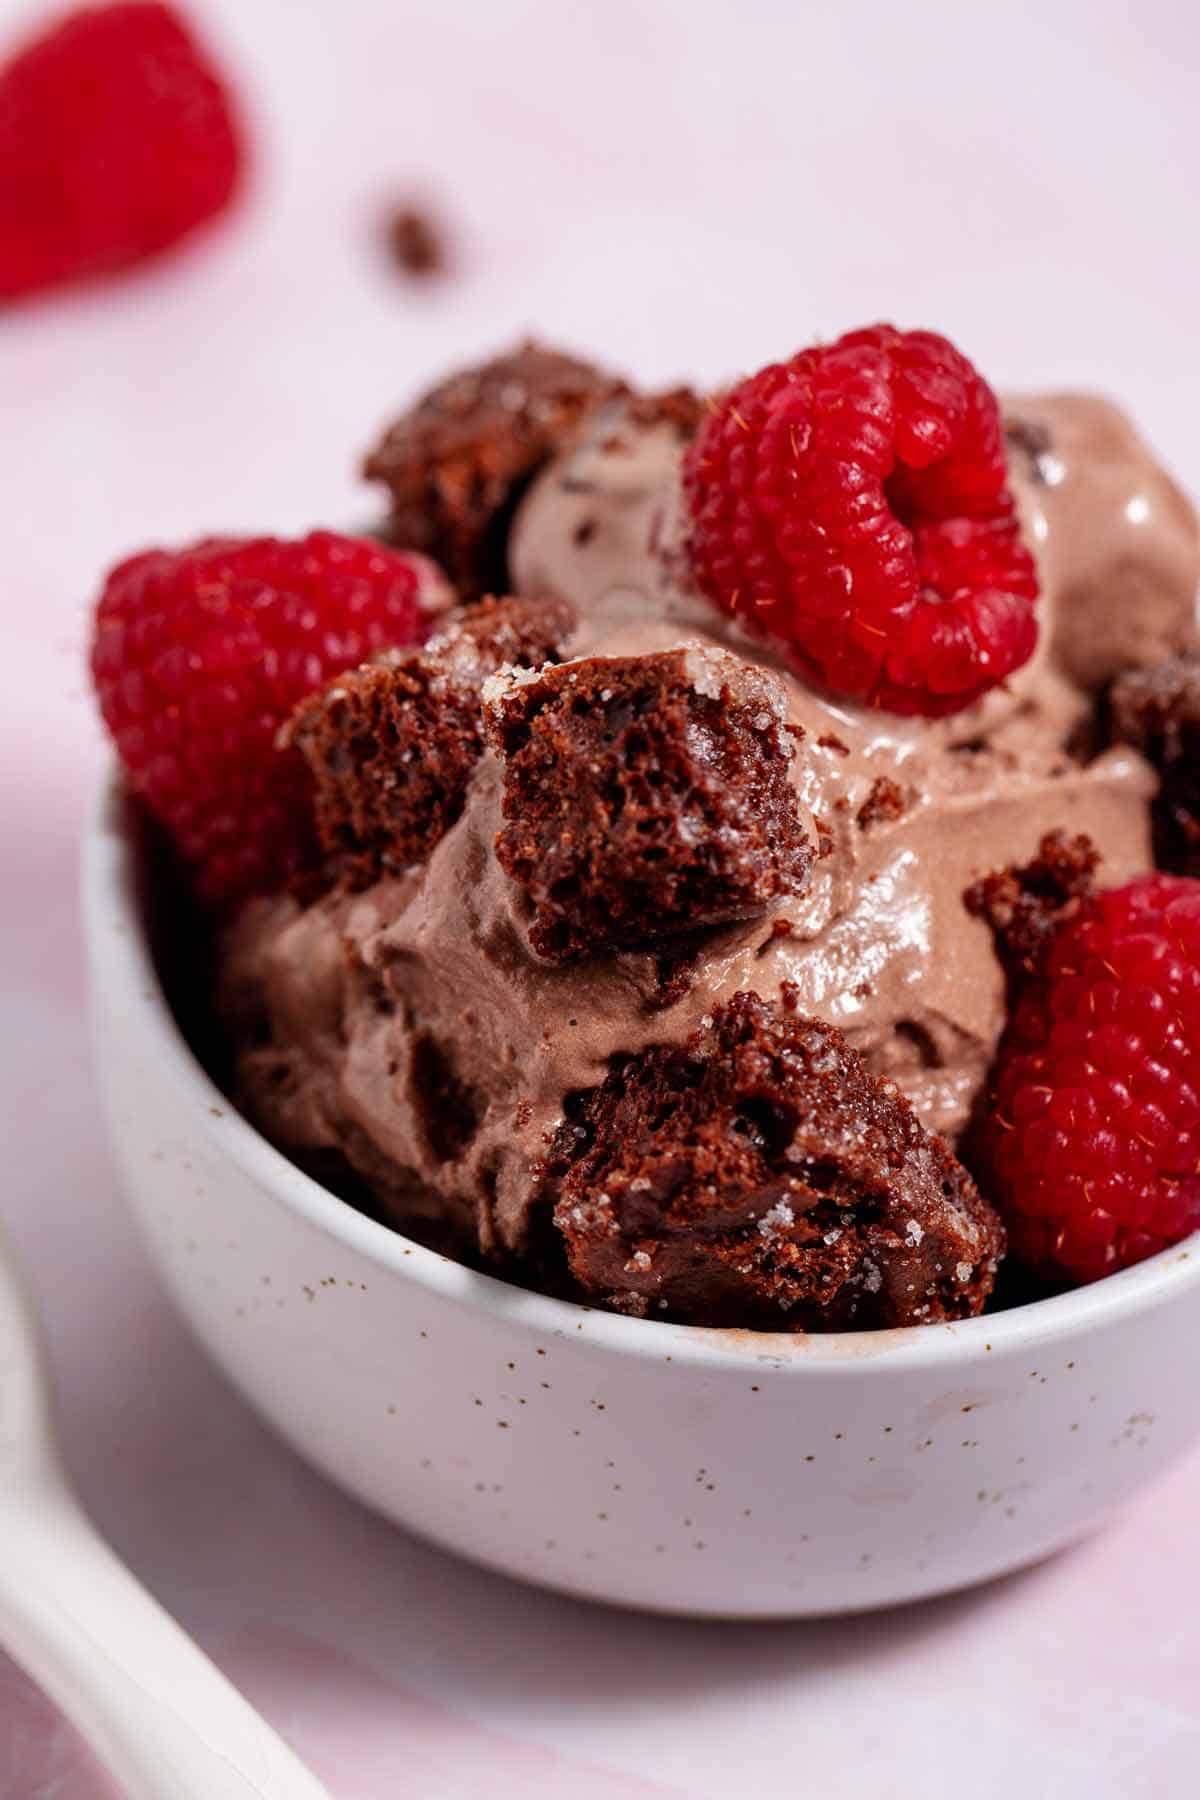 Bowl of chocolate ice cream with chocolate cake croutons and raspberries.